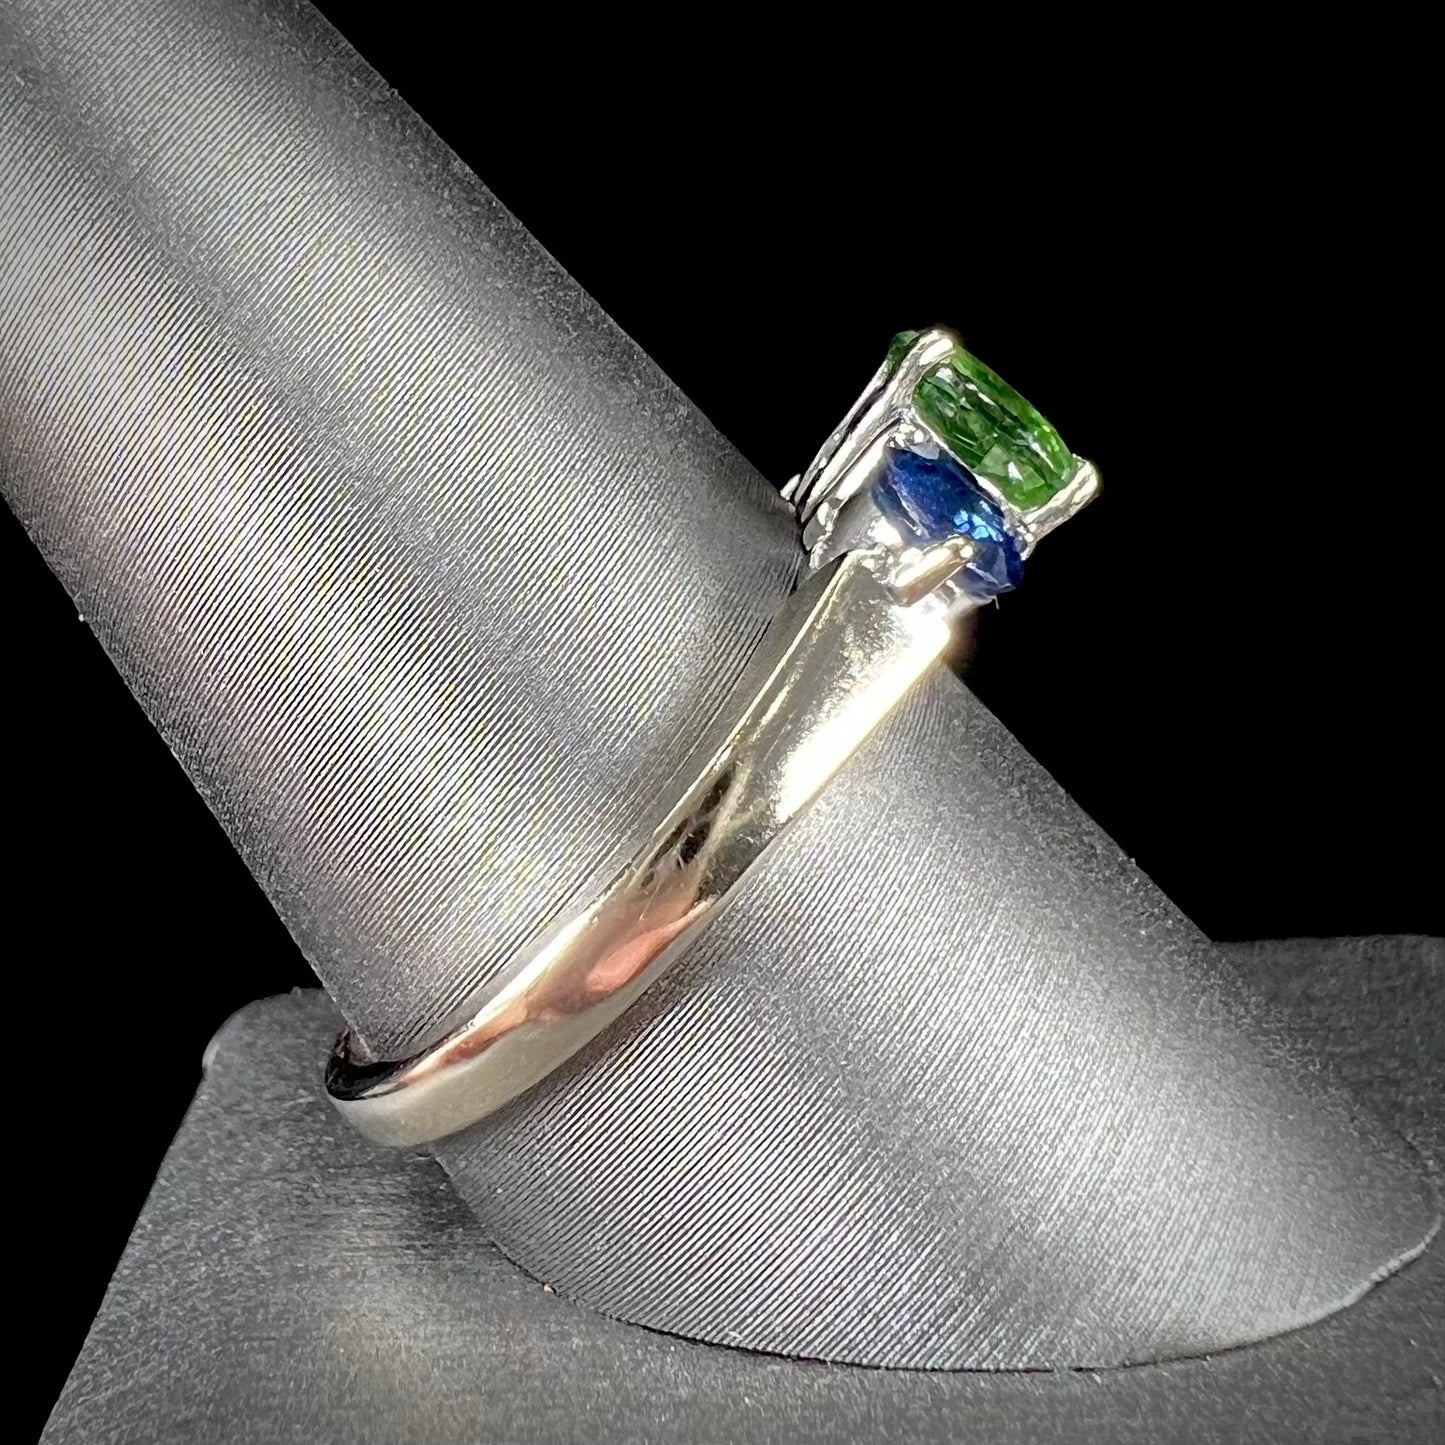 A ladies' white gold three stone ring set with two round blue sapphires and an oval cut green tsavorite garnet.